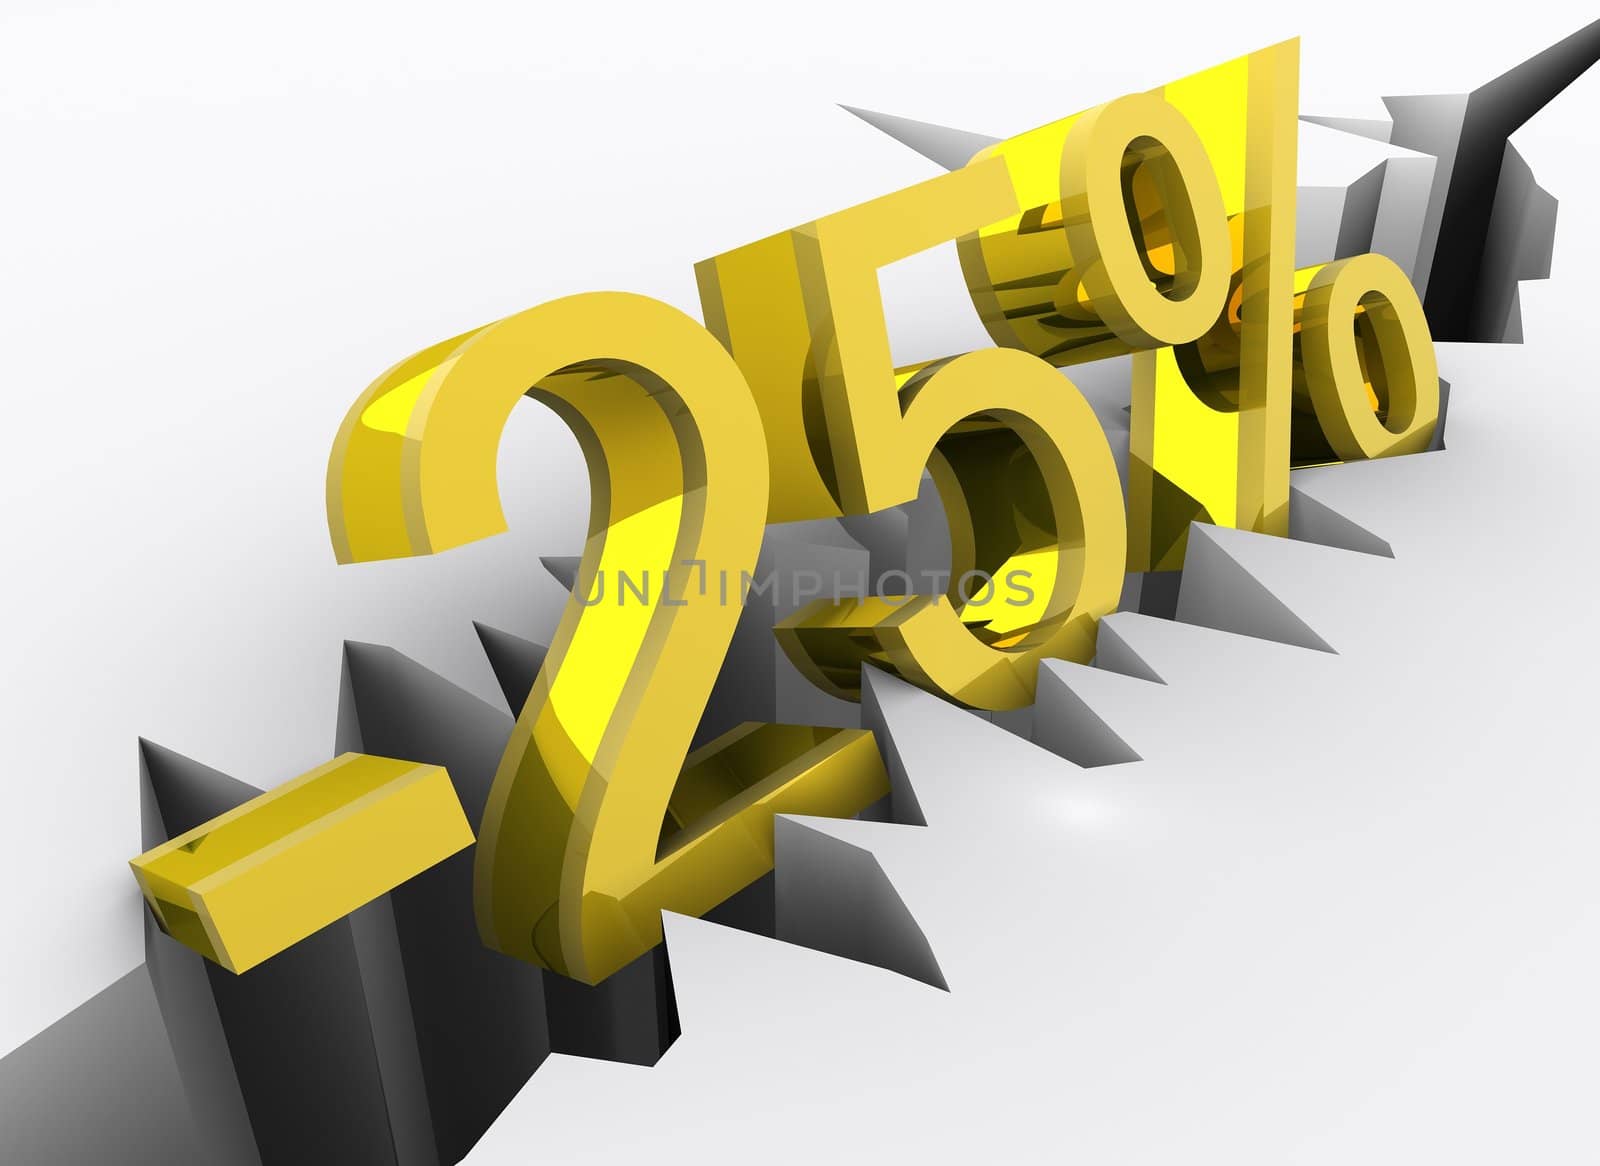 Concept of 25 percent discount portrayed by golden 3d number (minus twenty-five percent) rendered and isolated on white background with slight reflection.